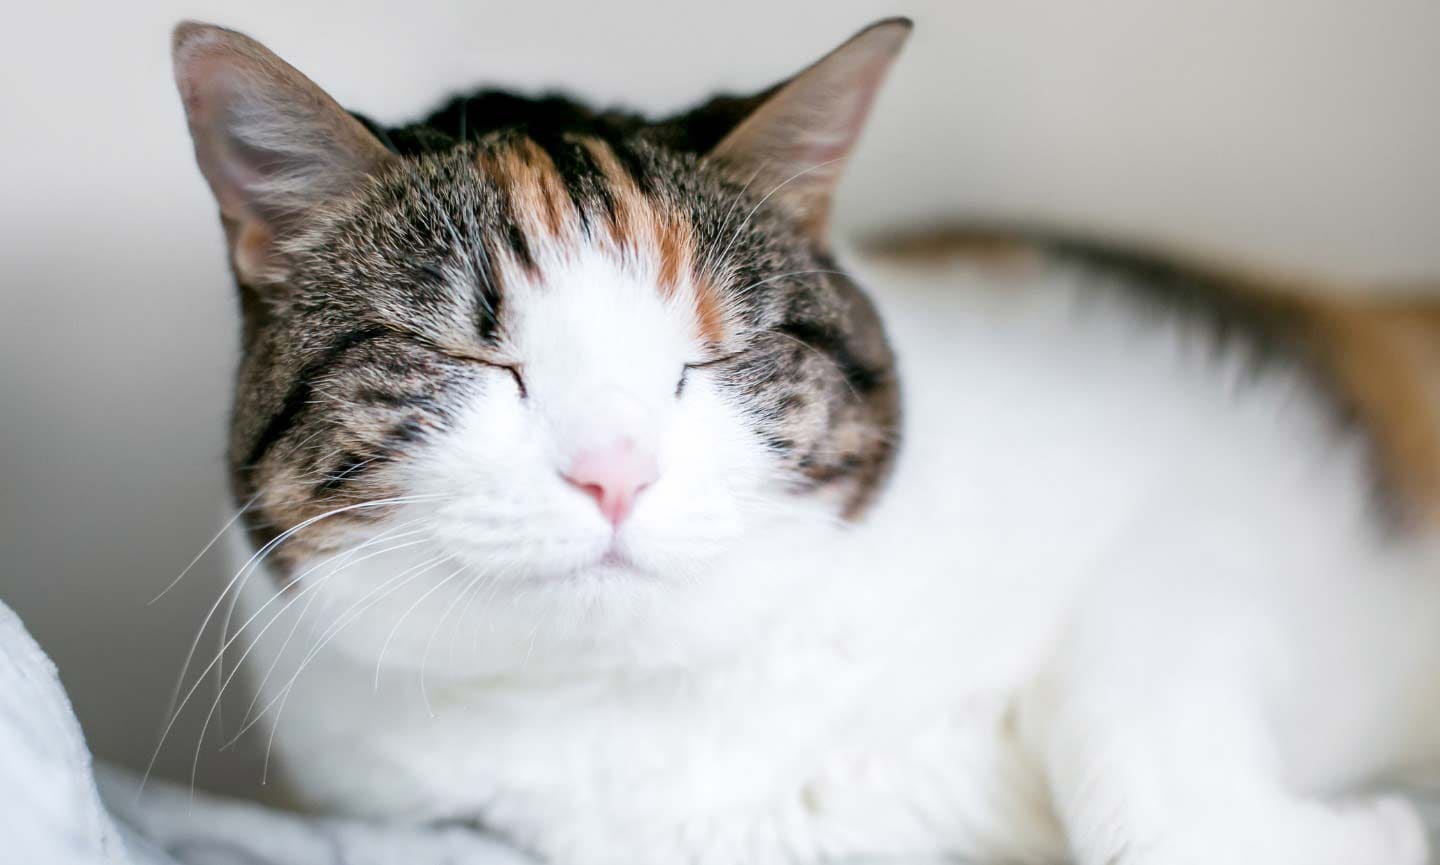 Photo of a cat with eyes closed